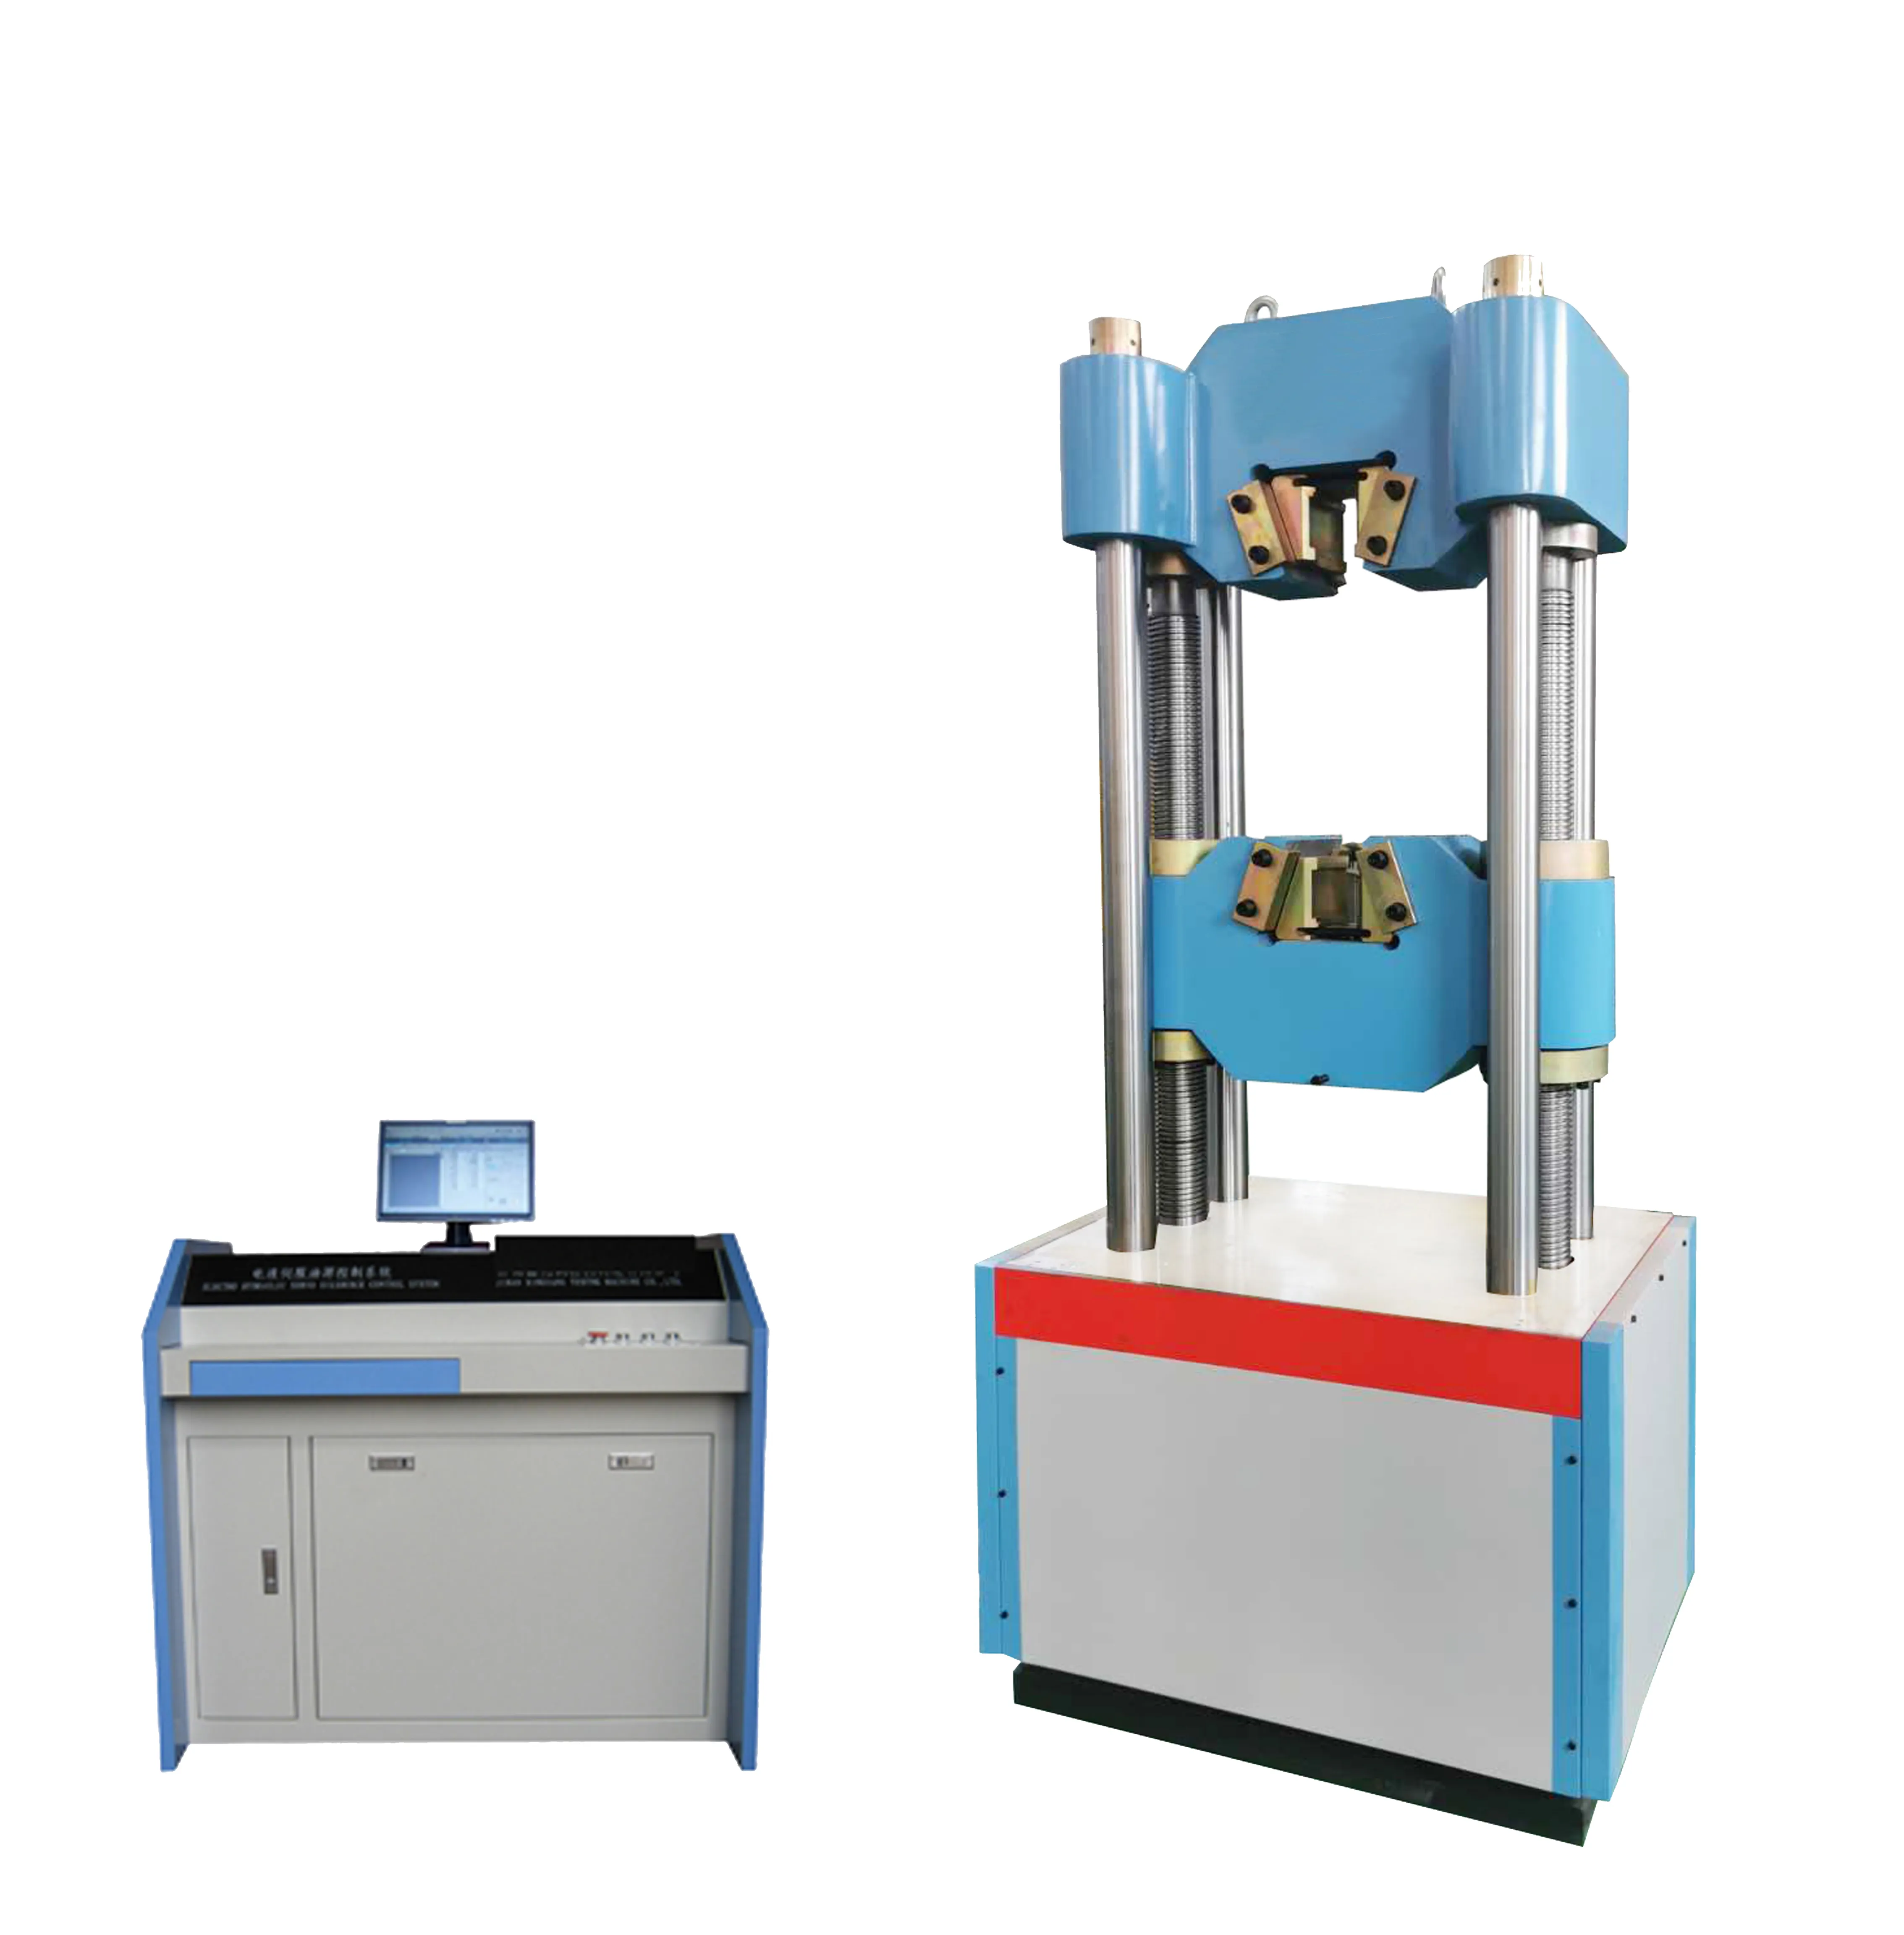 The technical characteristics and advantages of the 500ton universal testing machine